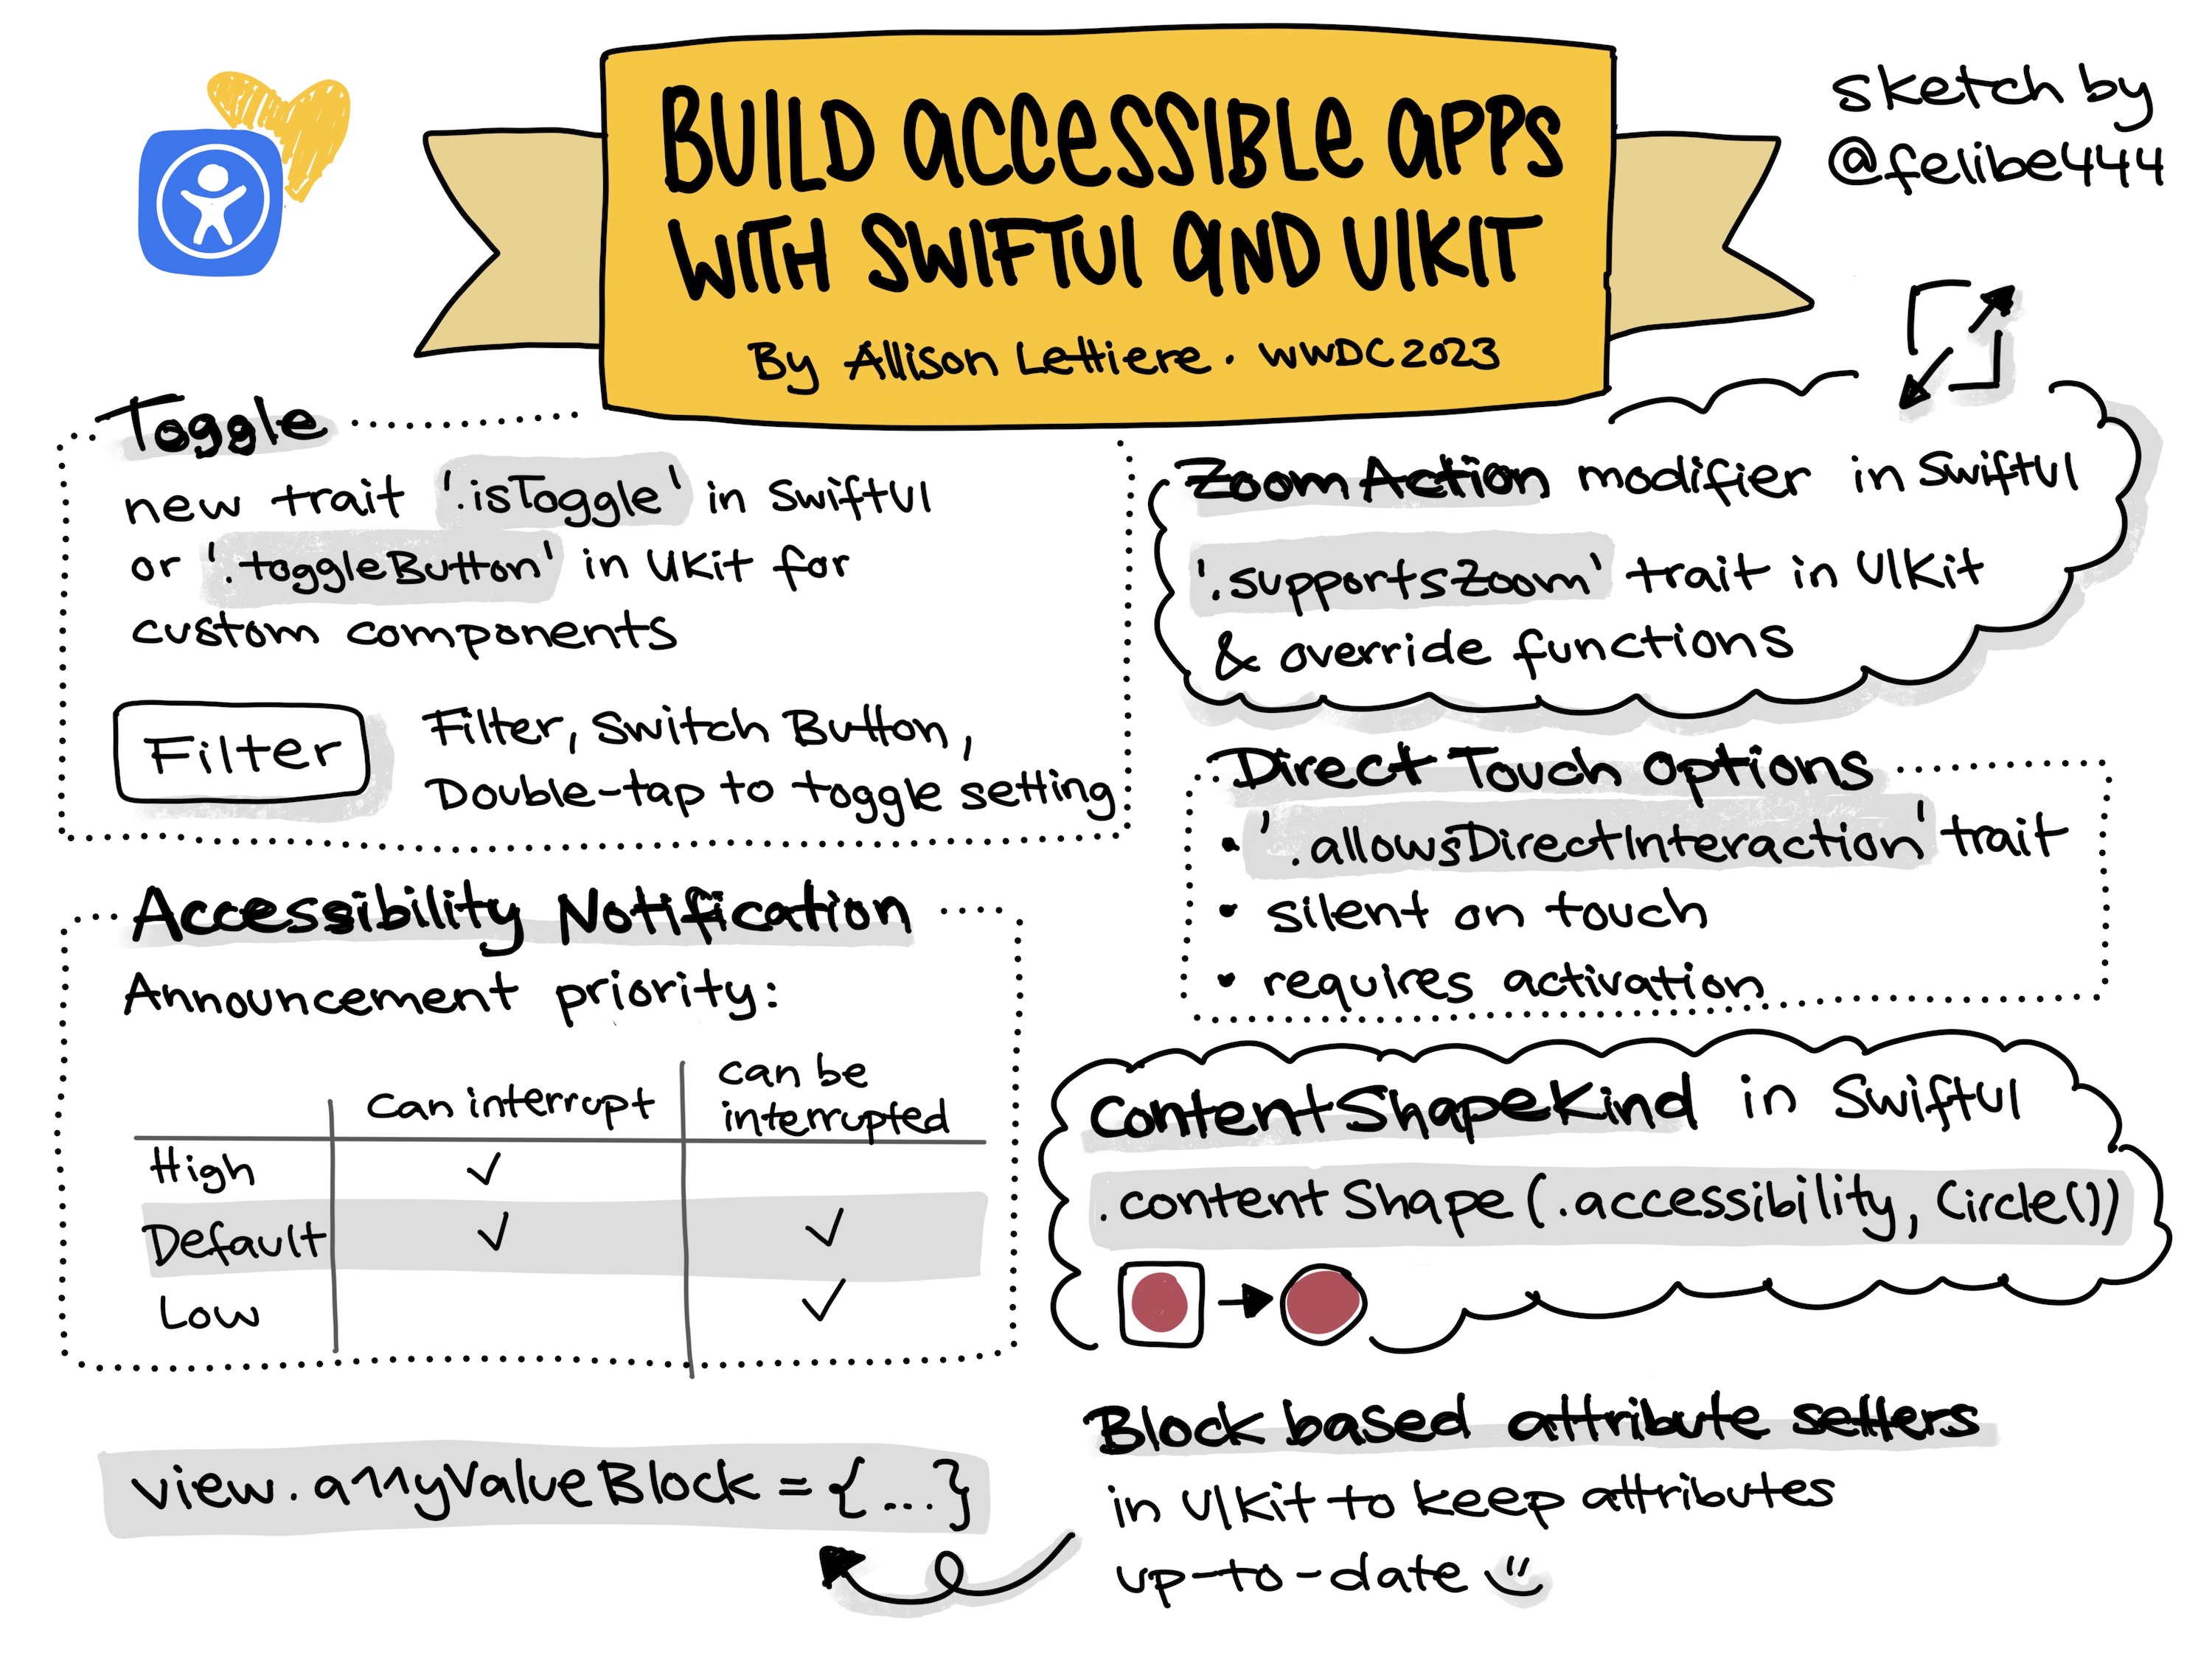 Sketchnote of WWDC 2023 talk about how to build accessible apps with Swift and SwiftUI and additions and enhancements in APIs